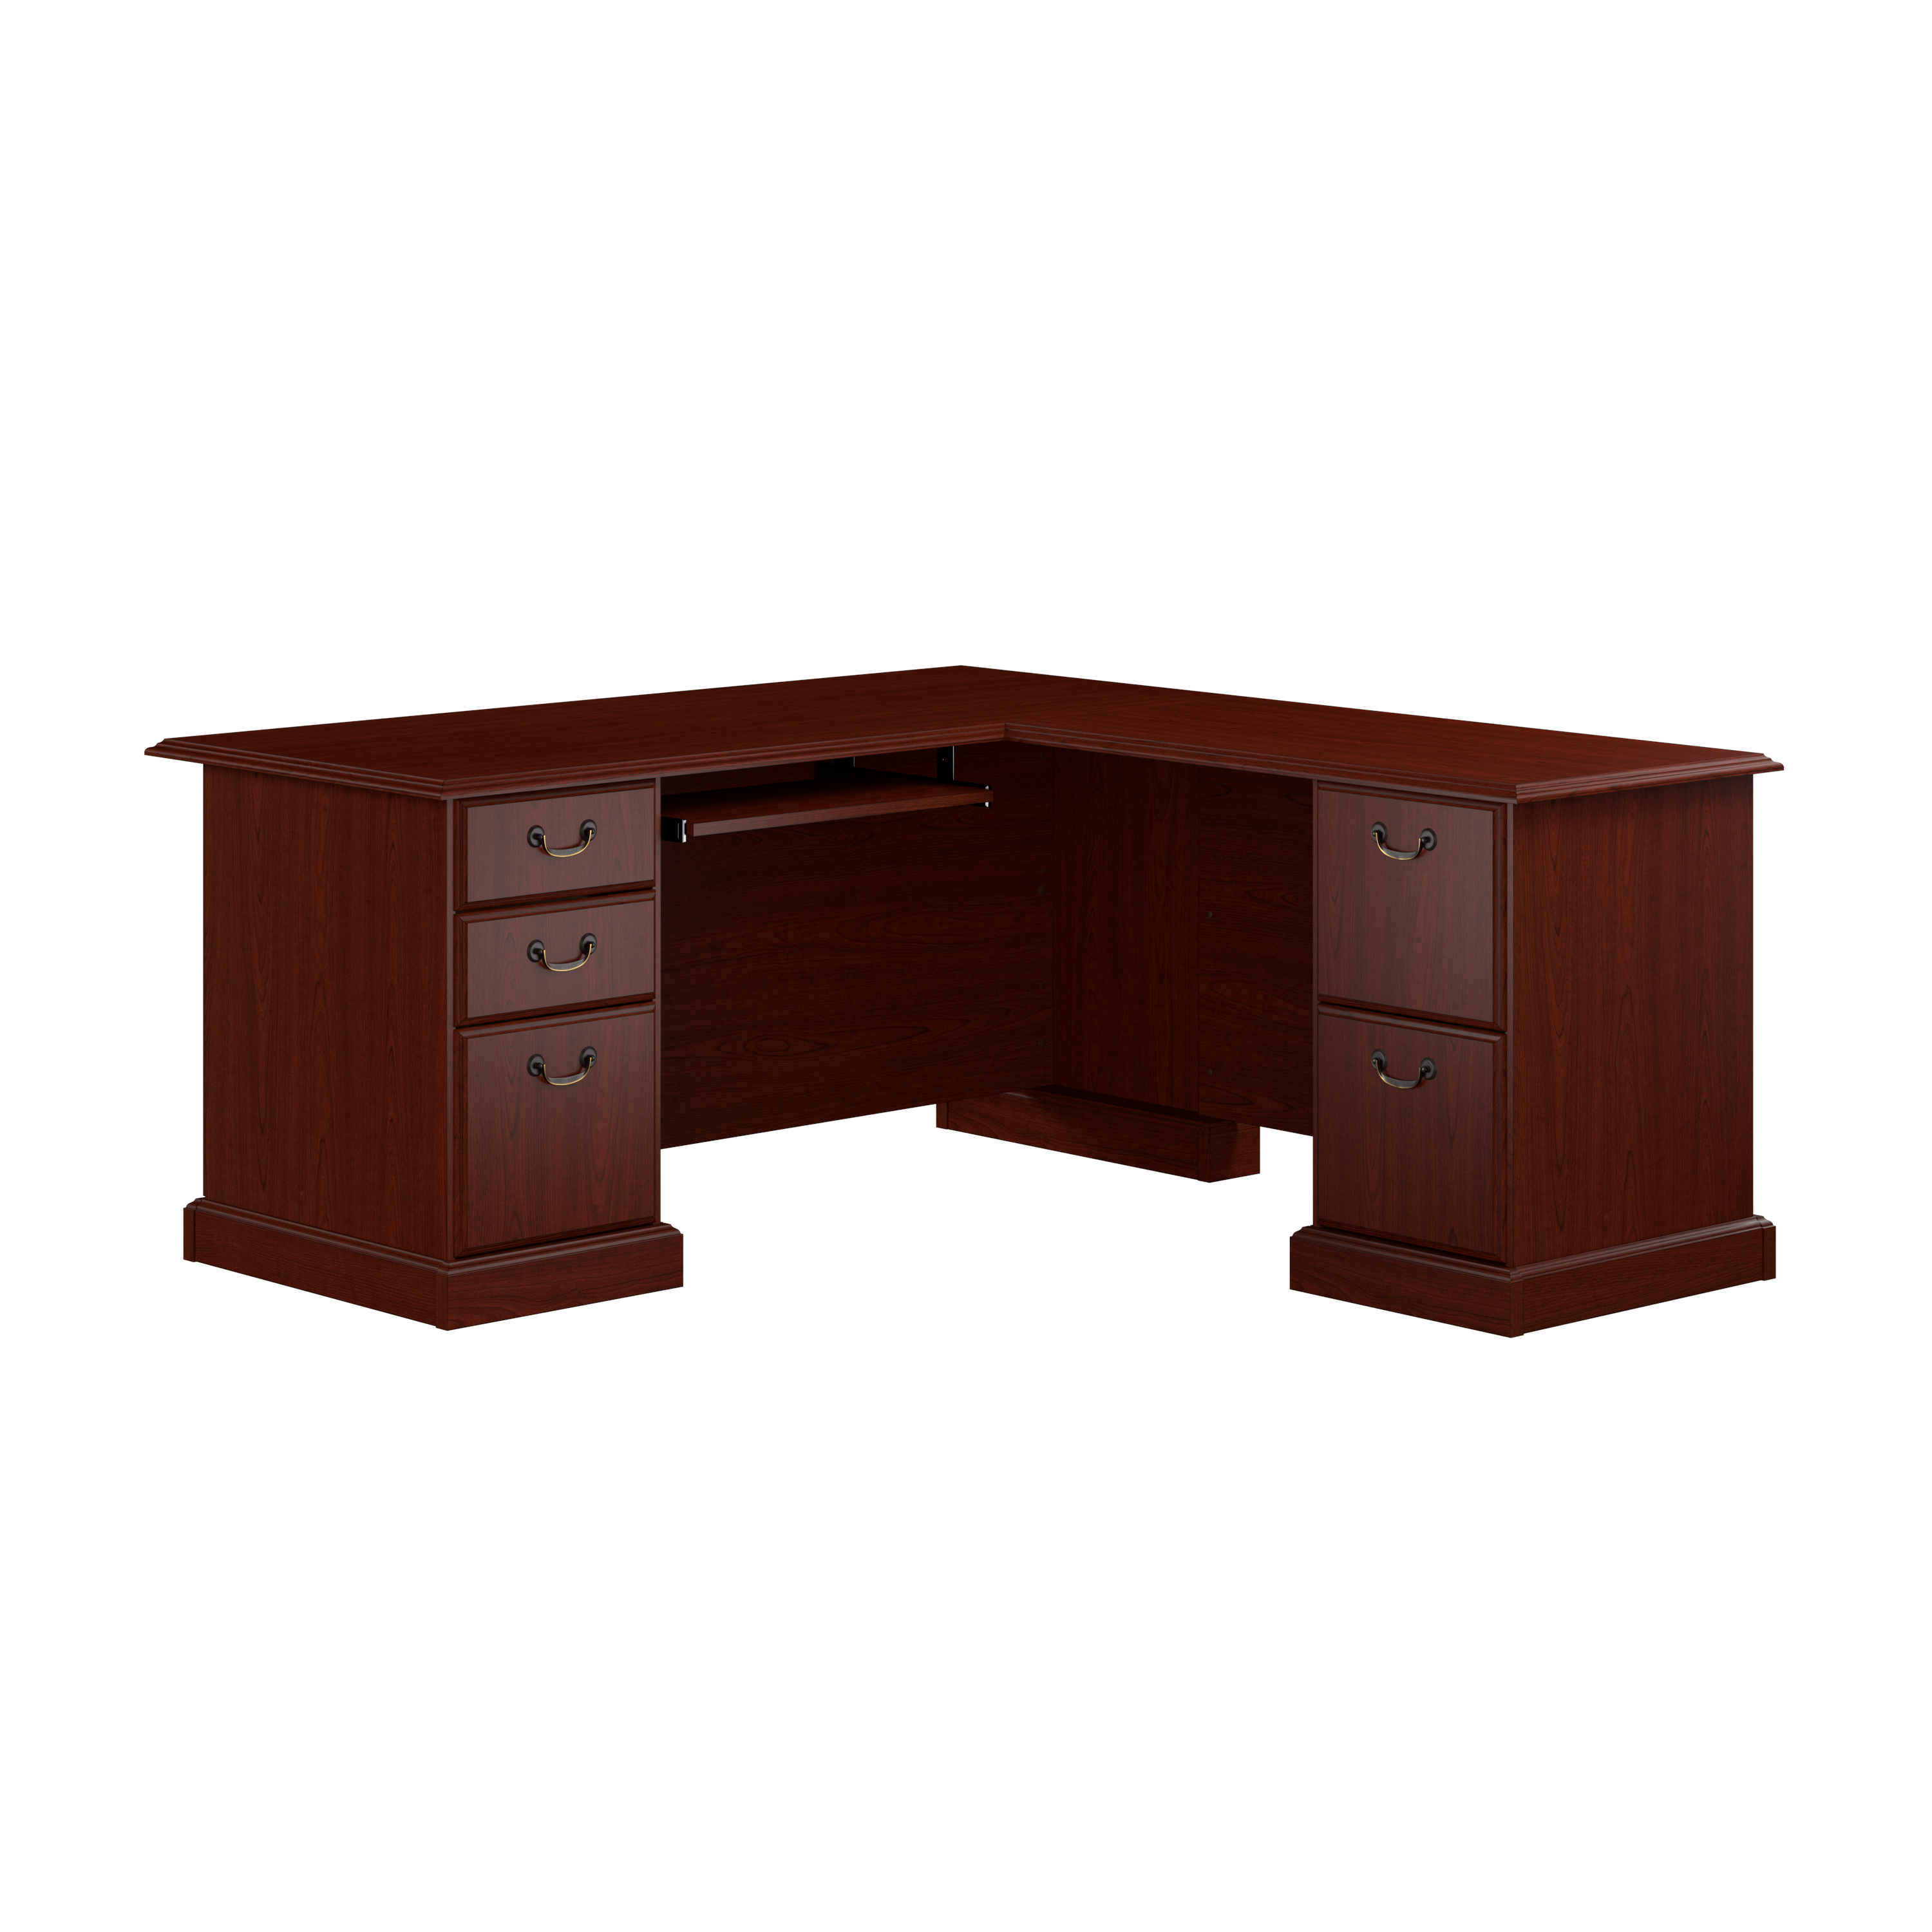 Shop Bush Business Furniture Arlington L Shaped Desk with Drawers and Keyboard Tray 02 WC65570-03K #color_harvest cherry